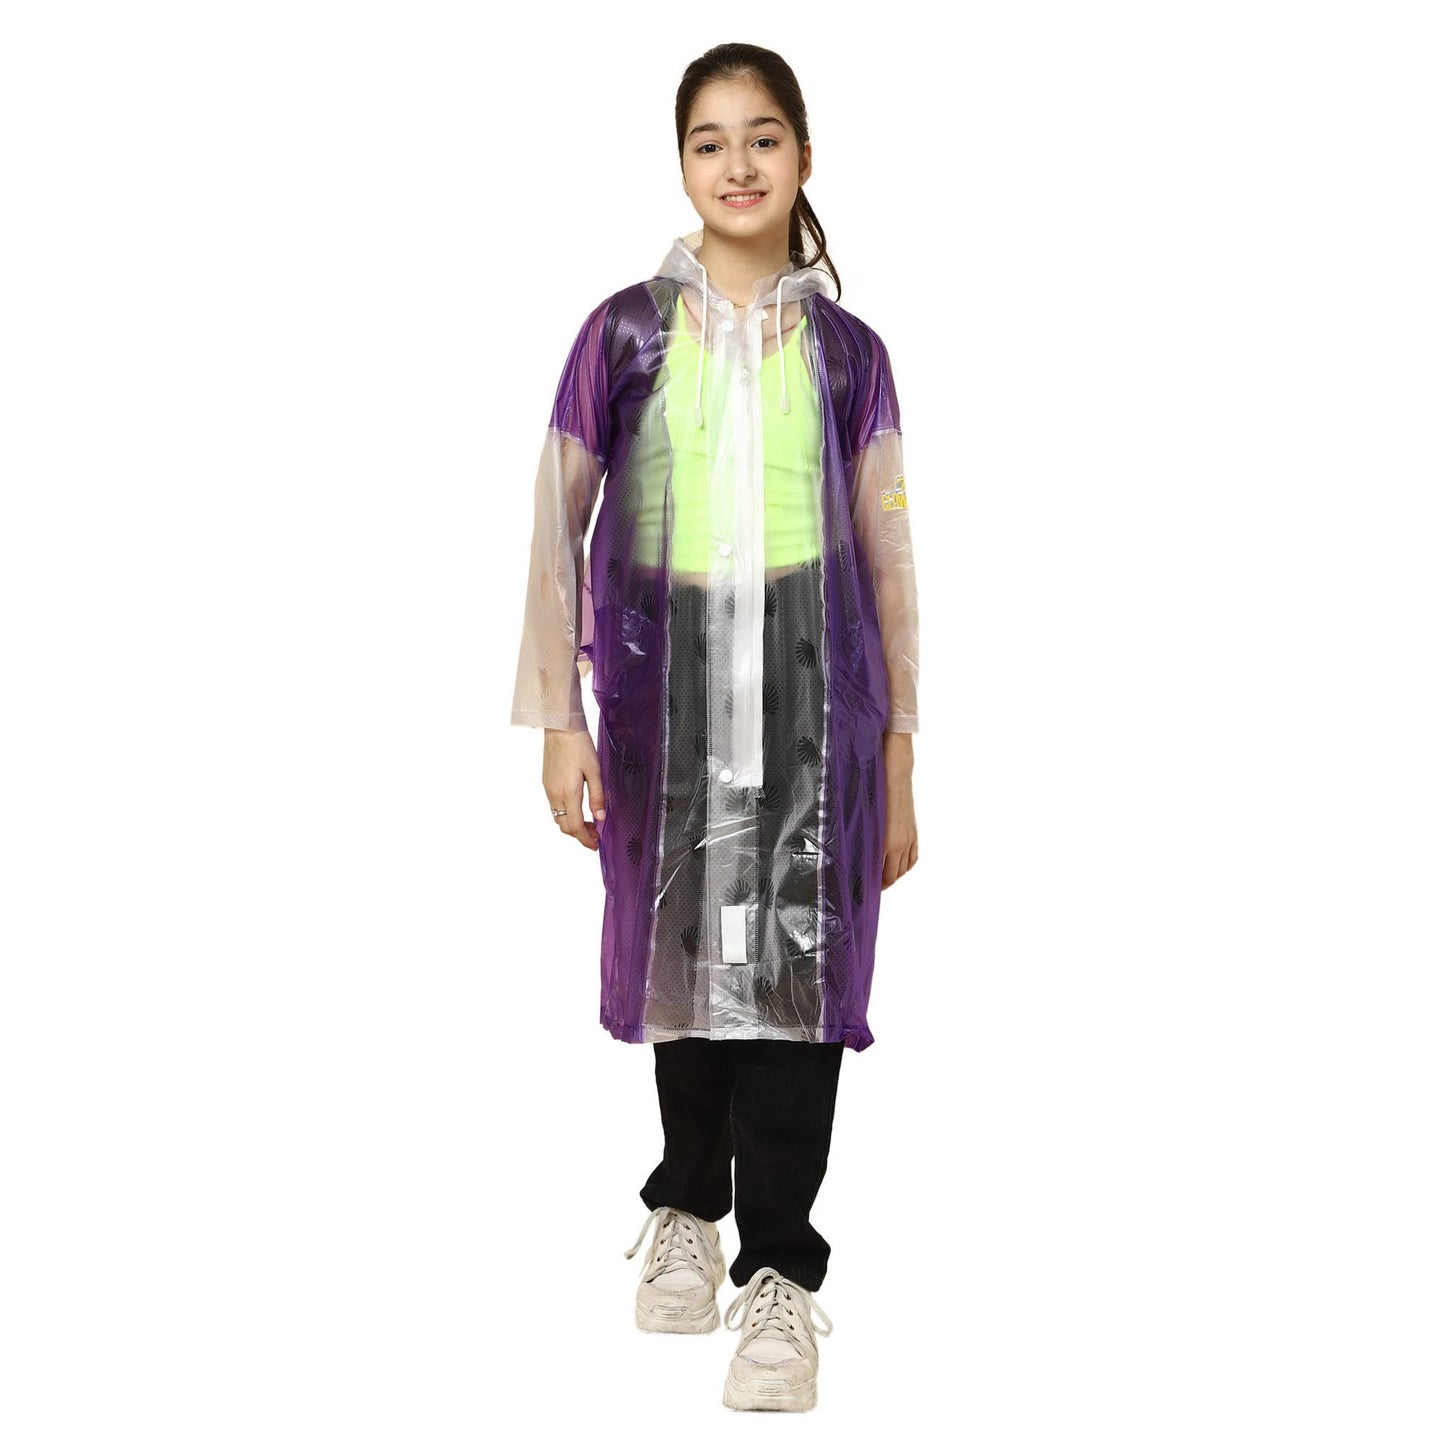 THE CLOWNFISH Archie Series Kids Waterproof PVC Longcoat with Adjustable Hood & Extra Space for Backpack/Schoolbag Holding. Plastic Pouch. Kid Age-4-5 years (Size-27-Purple)